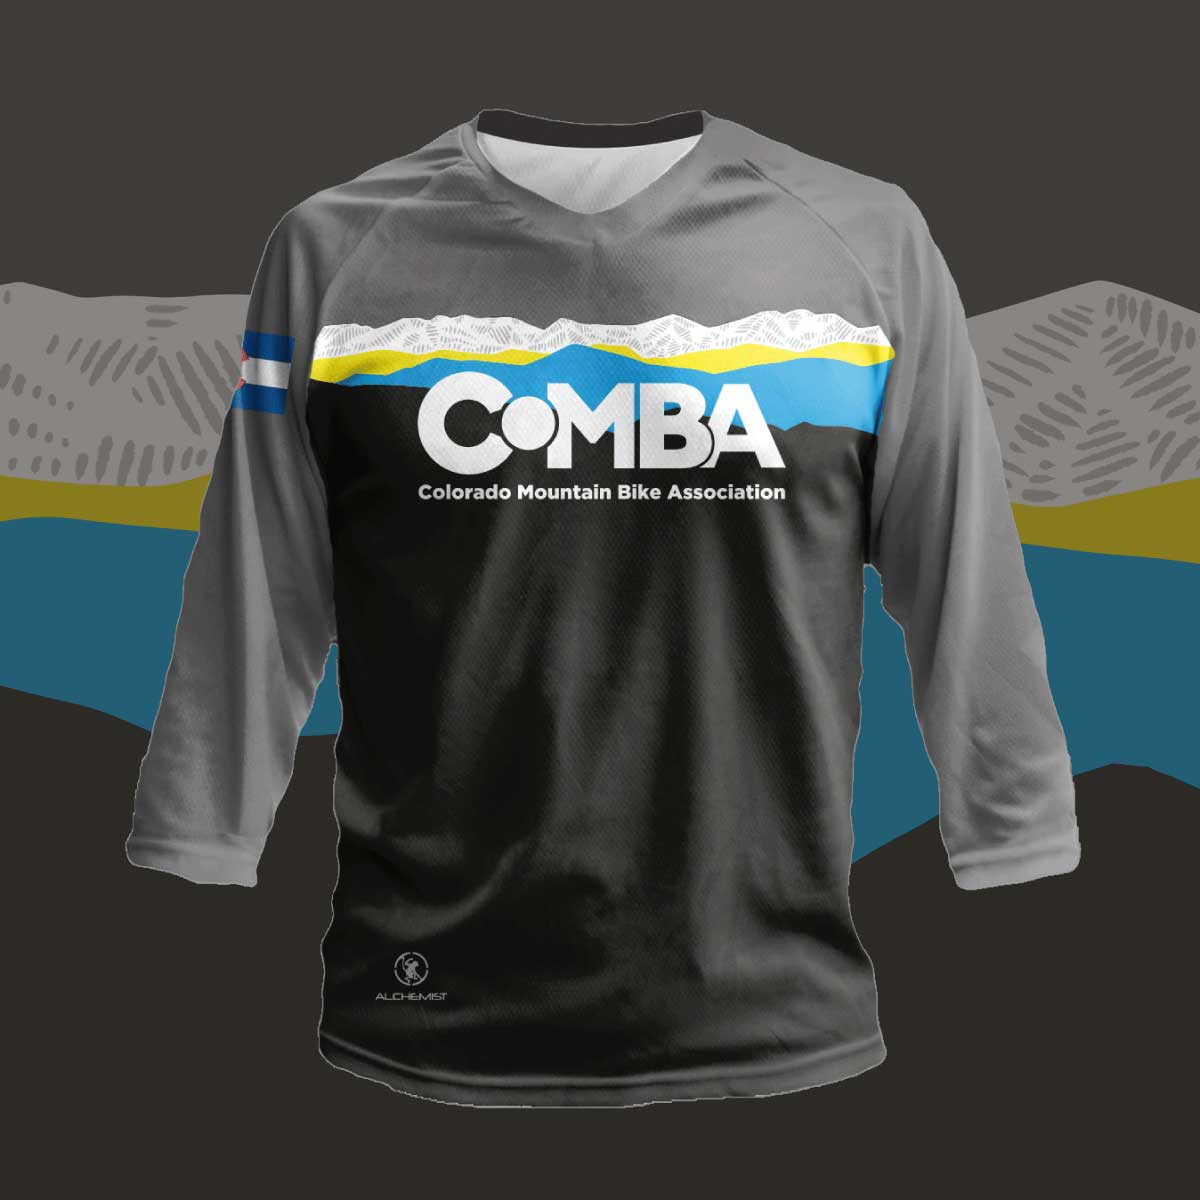 A black and grey MTB jersey with COMBA's logo and an illustration of the Front Range